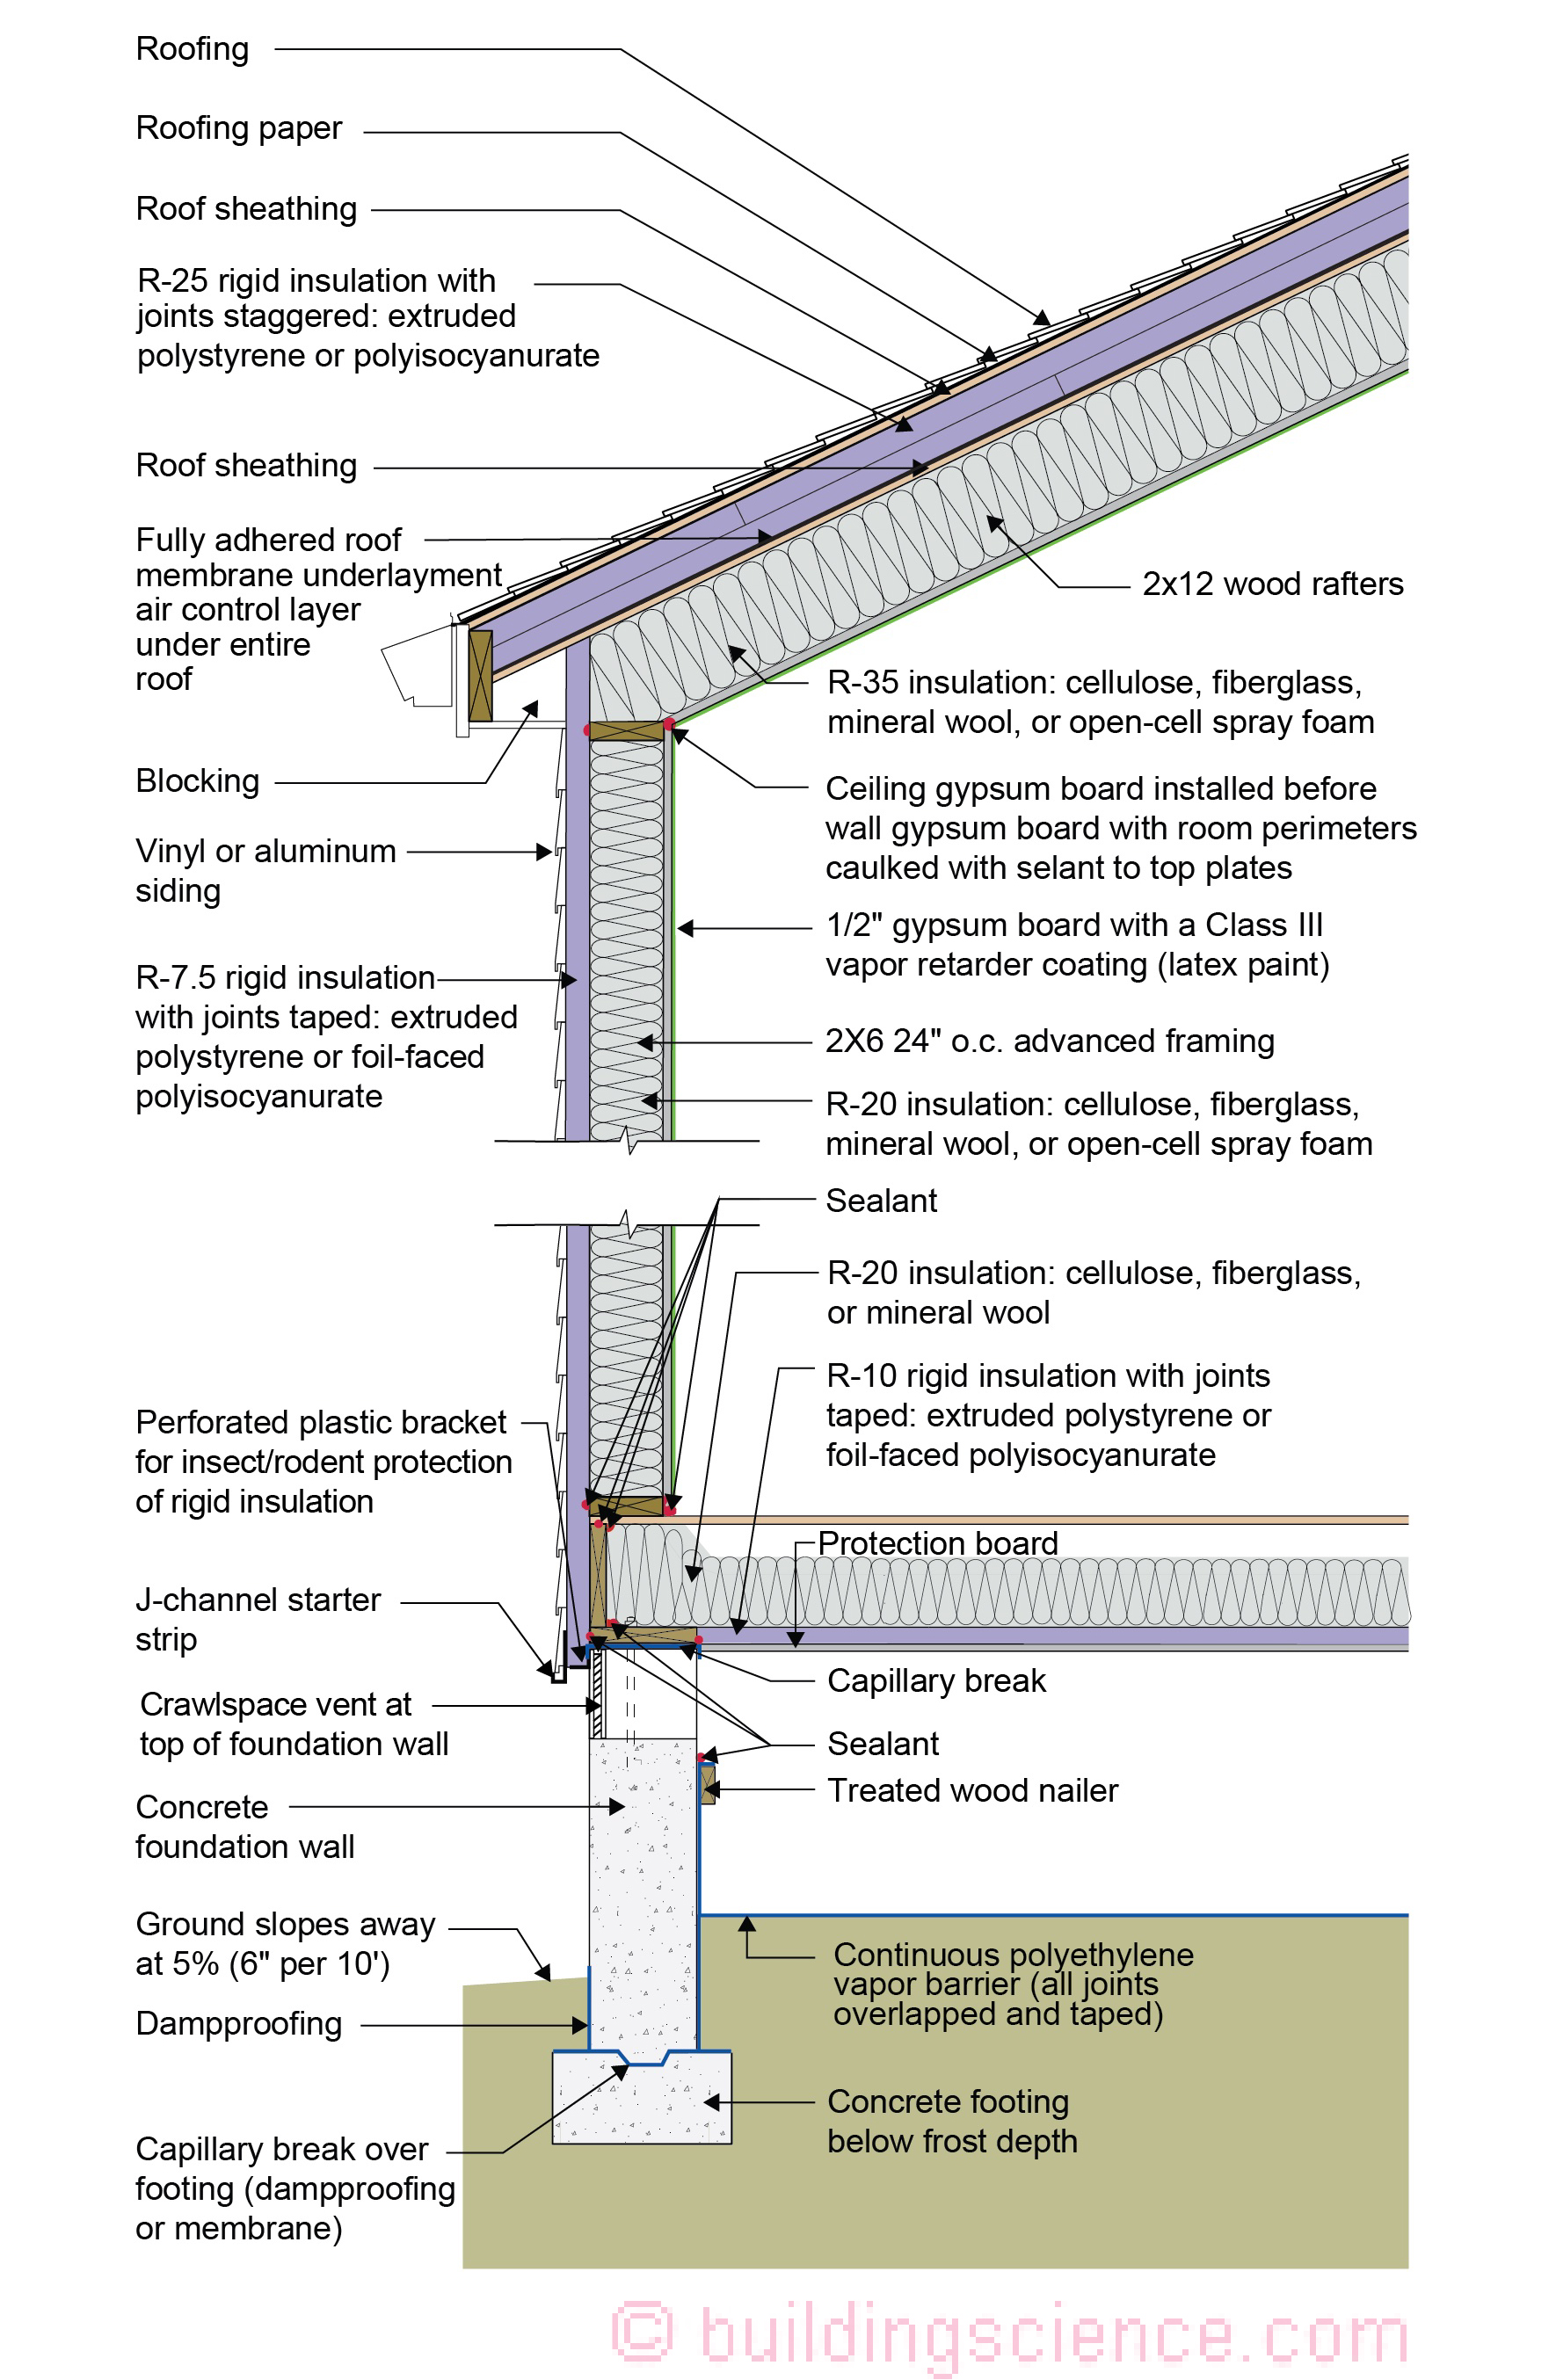 Figure 5 - IECC CLIMATE ZONE 5C_ UNVENTED ROOF, 2X6 WALL, VENTED CRAWL SPACE REV SG-01